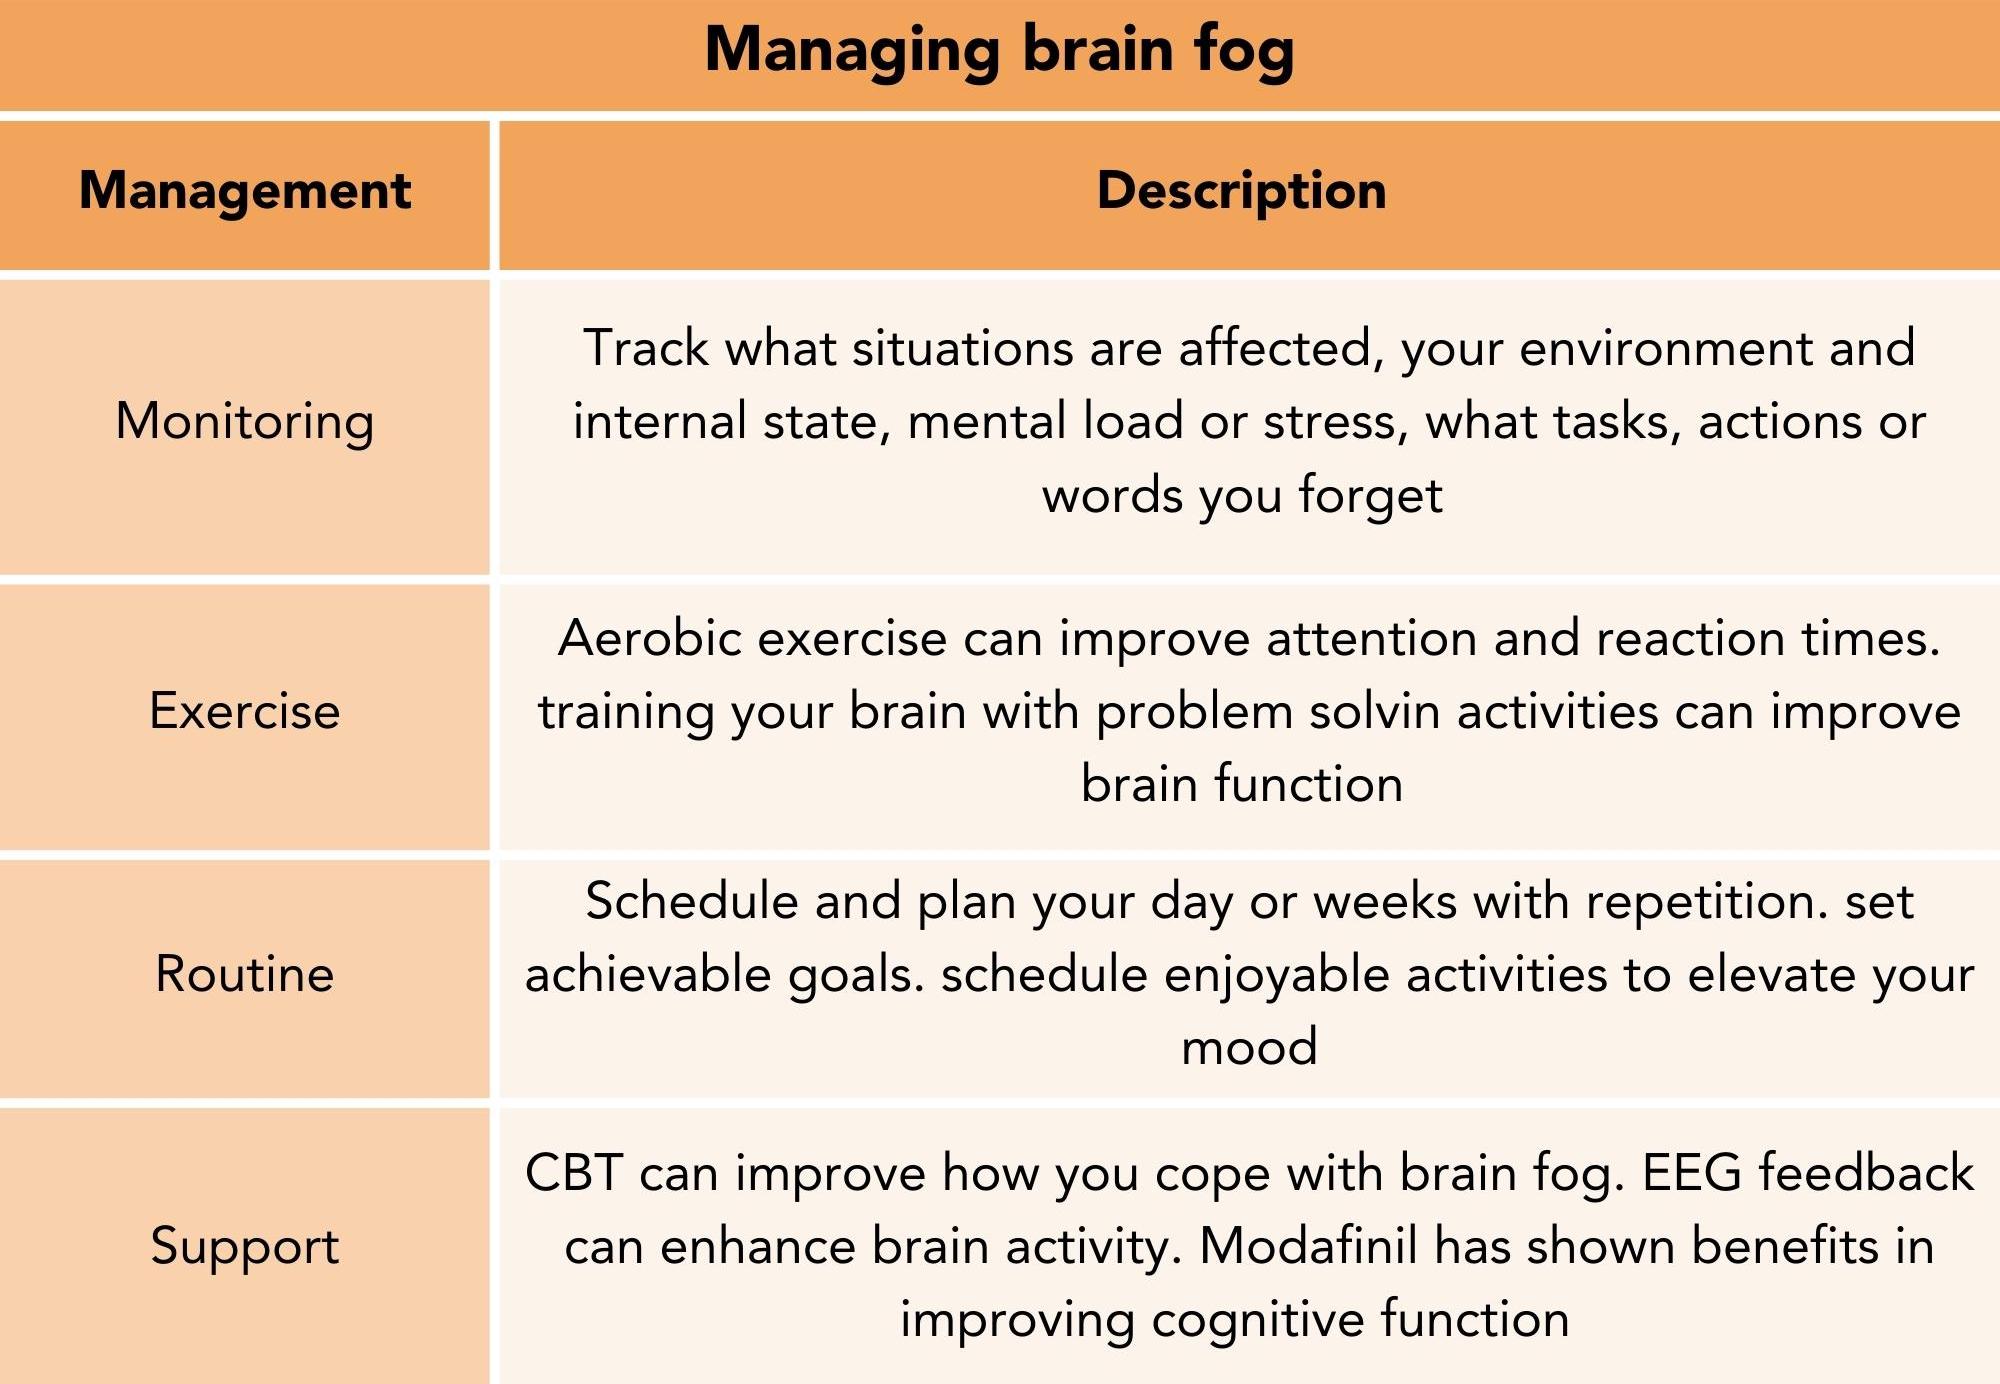 Techniques to manage brain fog caused by breast cancer treatment